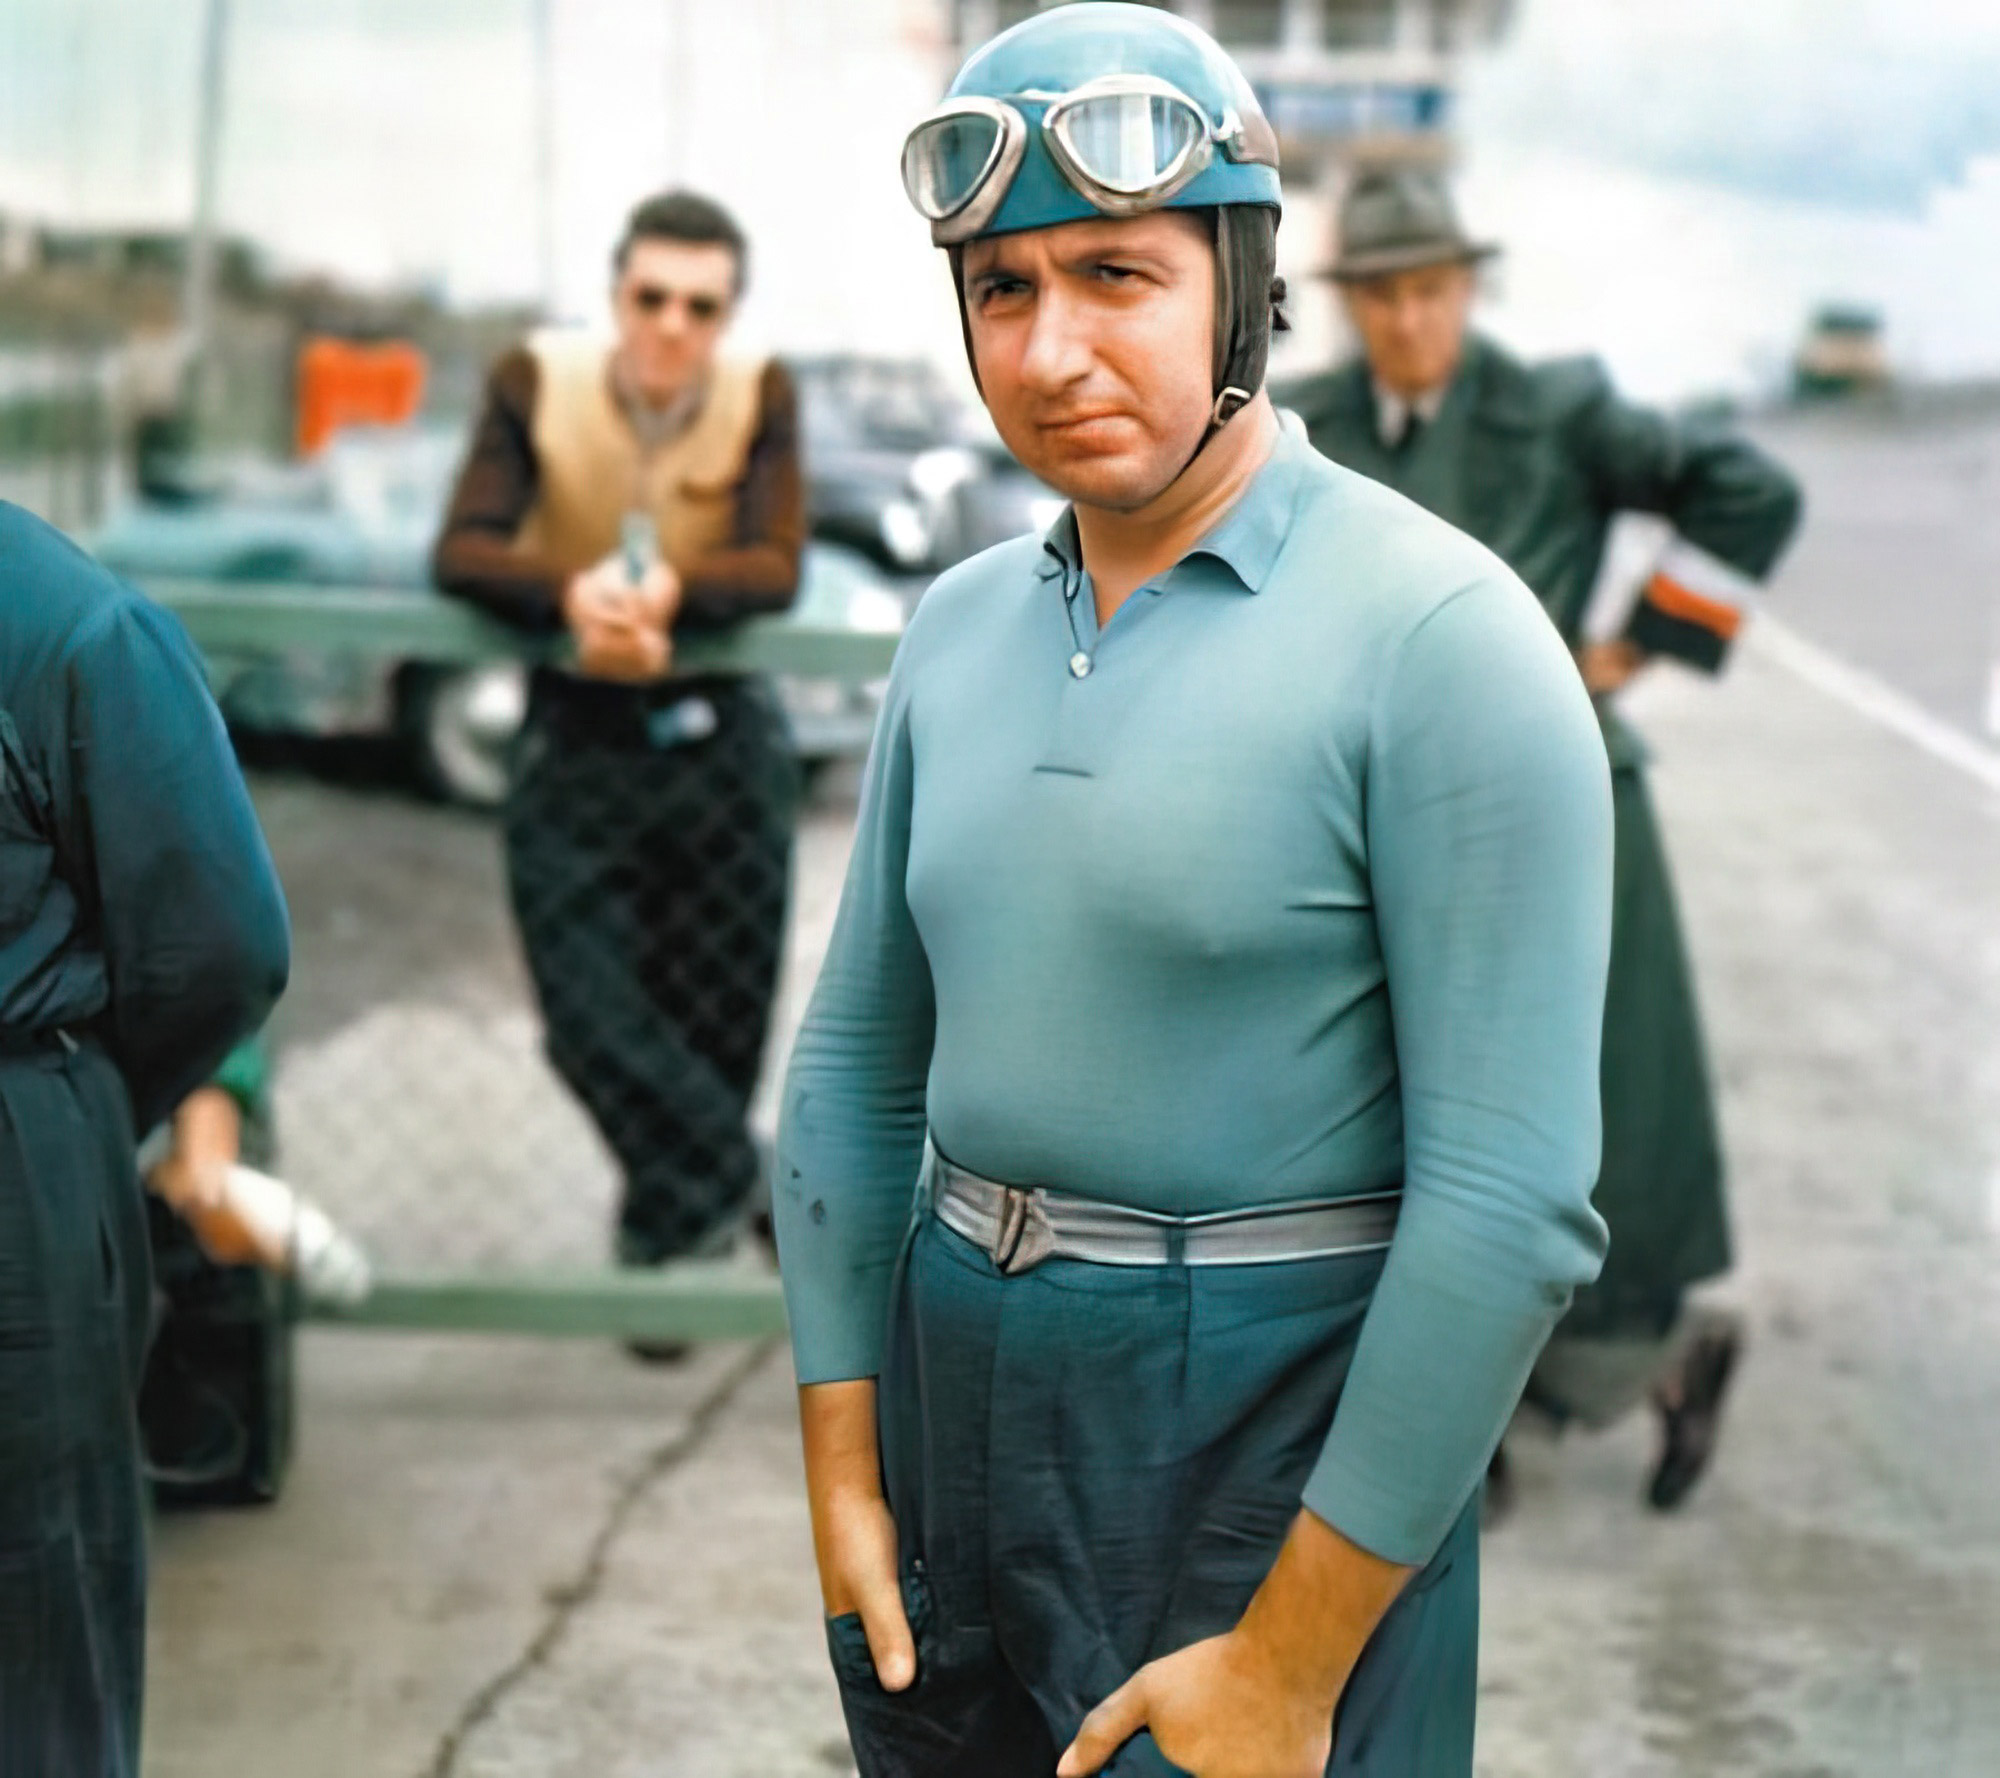 Alberto Ascari in light blue driver's clothing and helmet